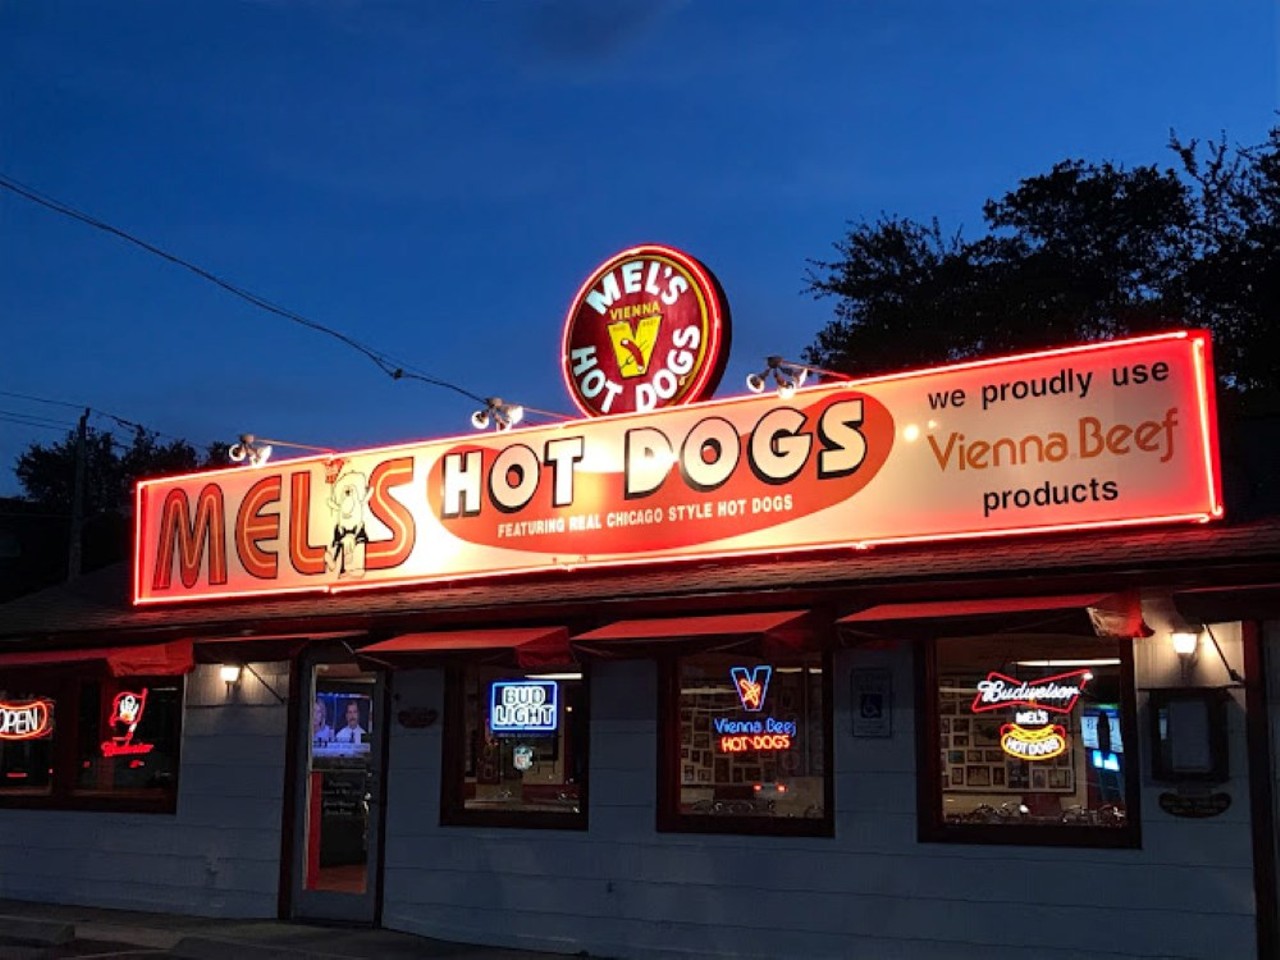 Mel’s Hot Dogs
4136 E Busch Blvd., Tampa, 813-985-8000
Easily, one of the best places to get a hot dog in the Bay, Mel’s has been serving up dogs since 1973 (that’s 50 years!), and is known for its all beef Chicago-style hot dogs served on a steamed poppy seed bun with all the fixins’
Photo via Google Maps